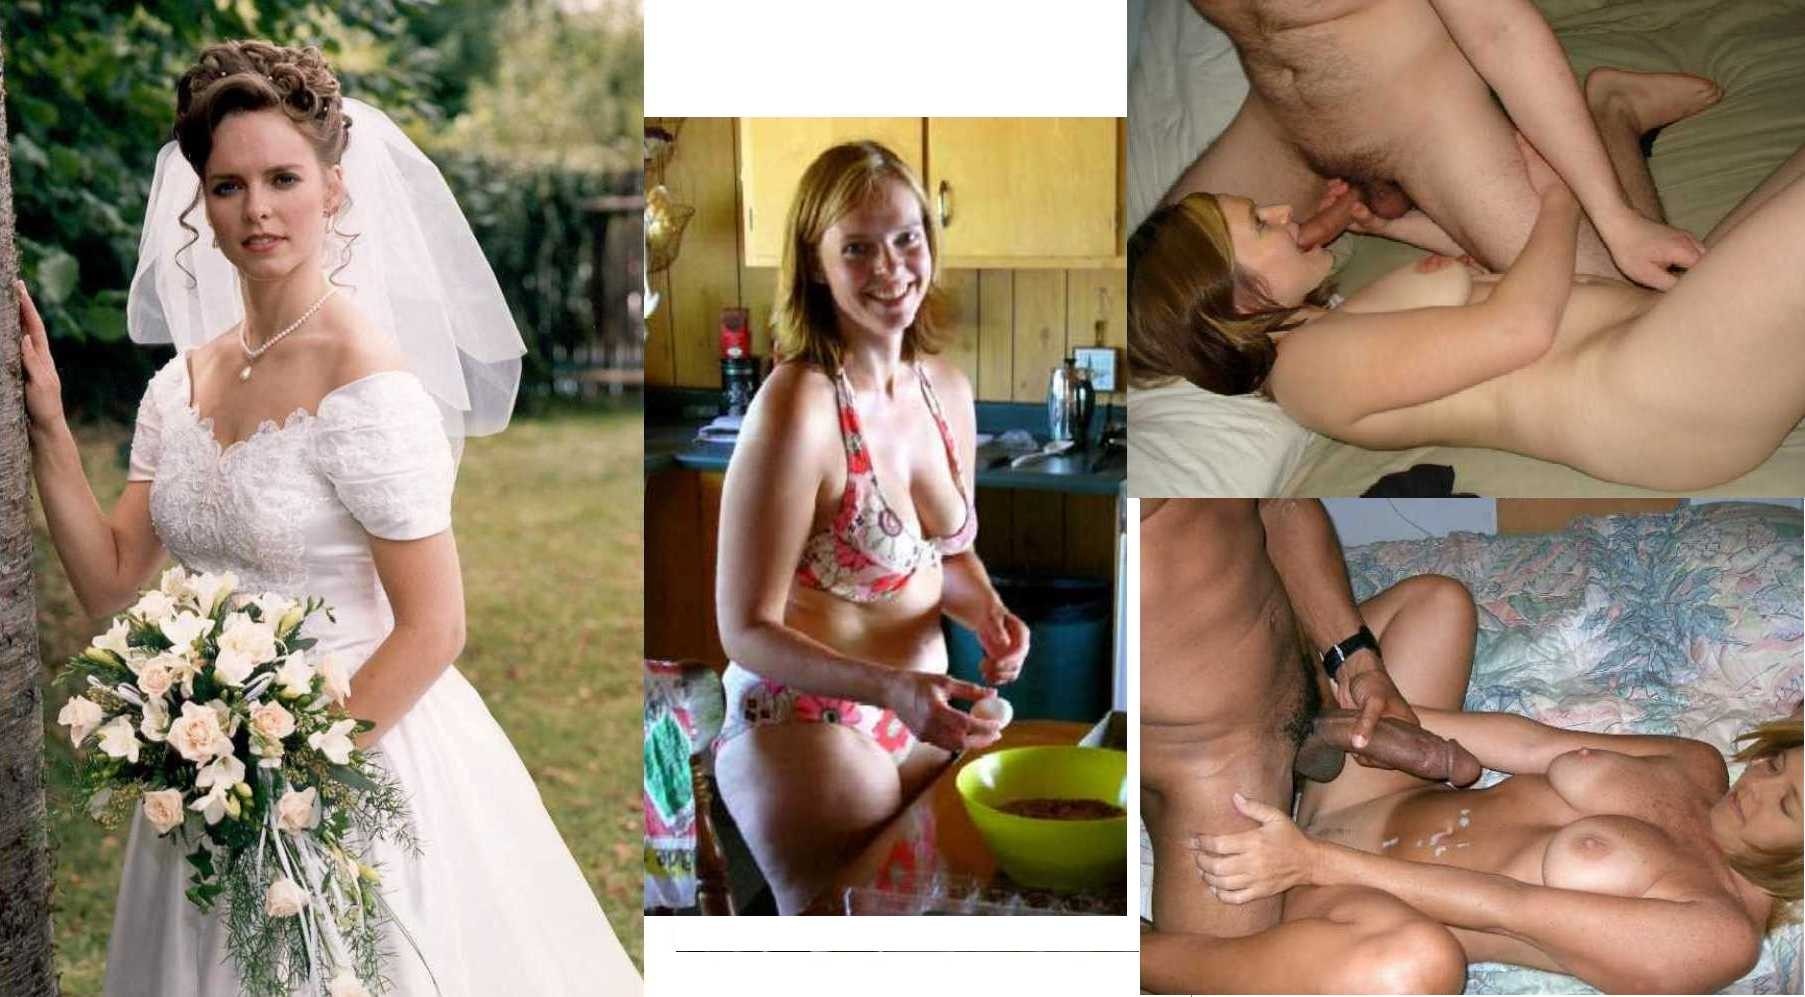 Russian Sex After Marriage (60 photos)